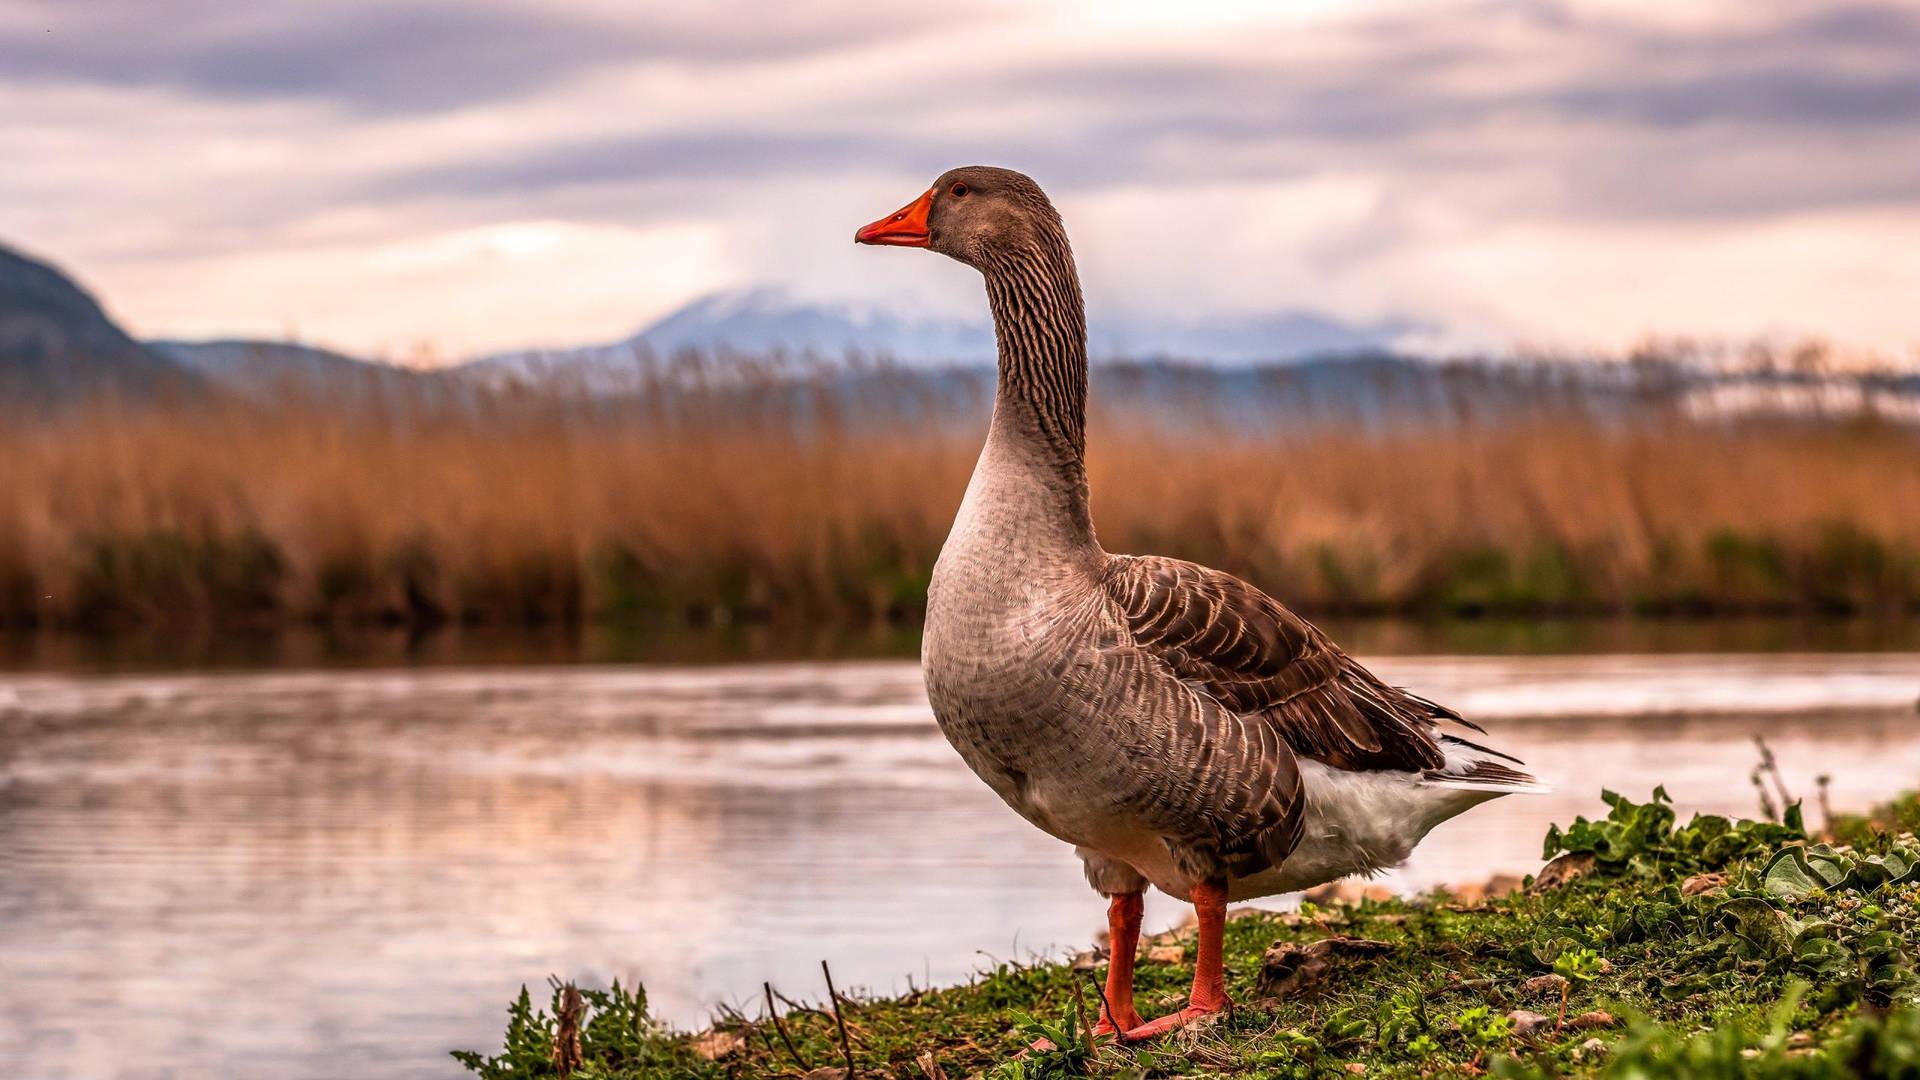 Wild Goose Perched On Riverbank Wallpaper